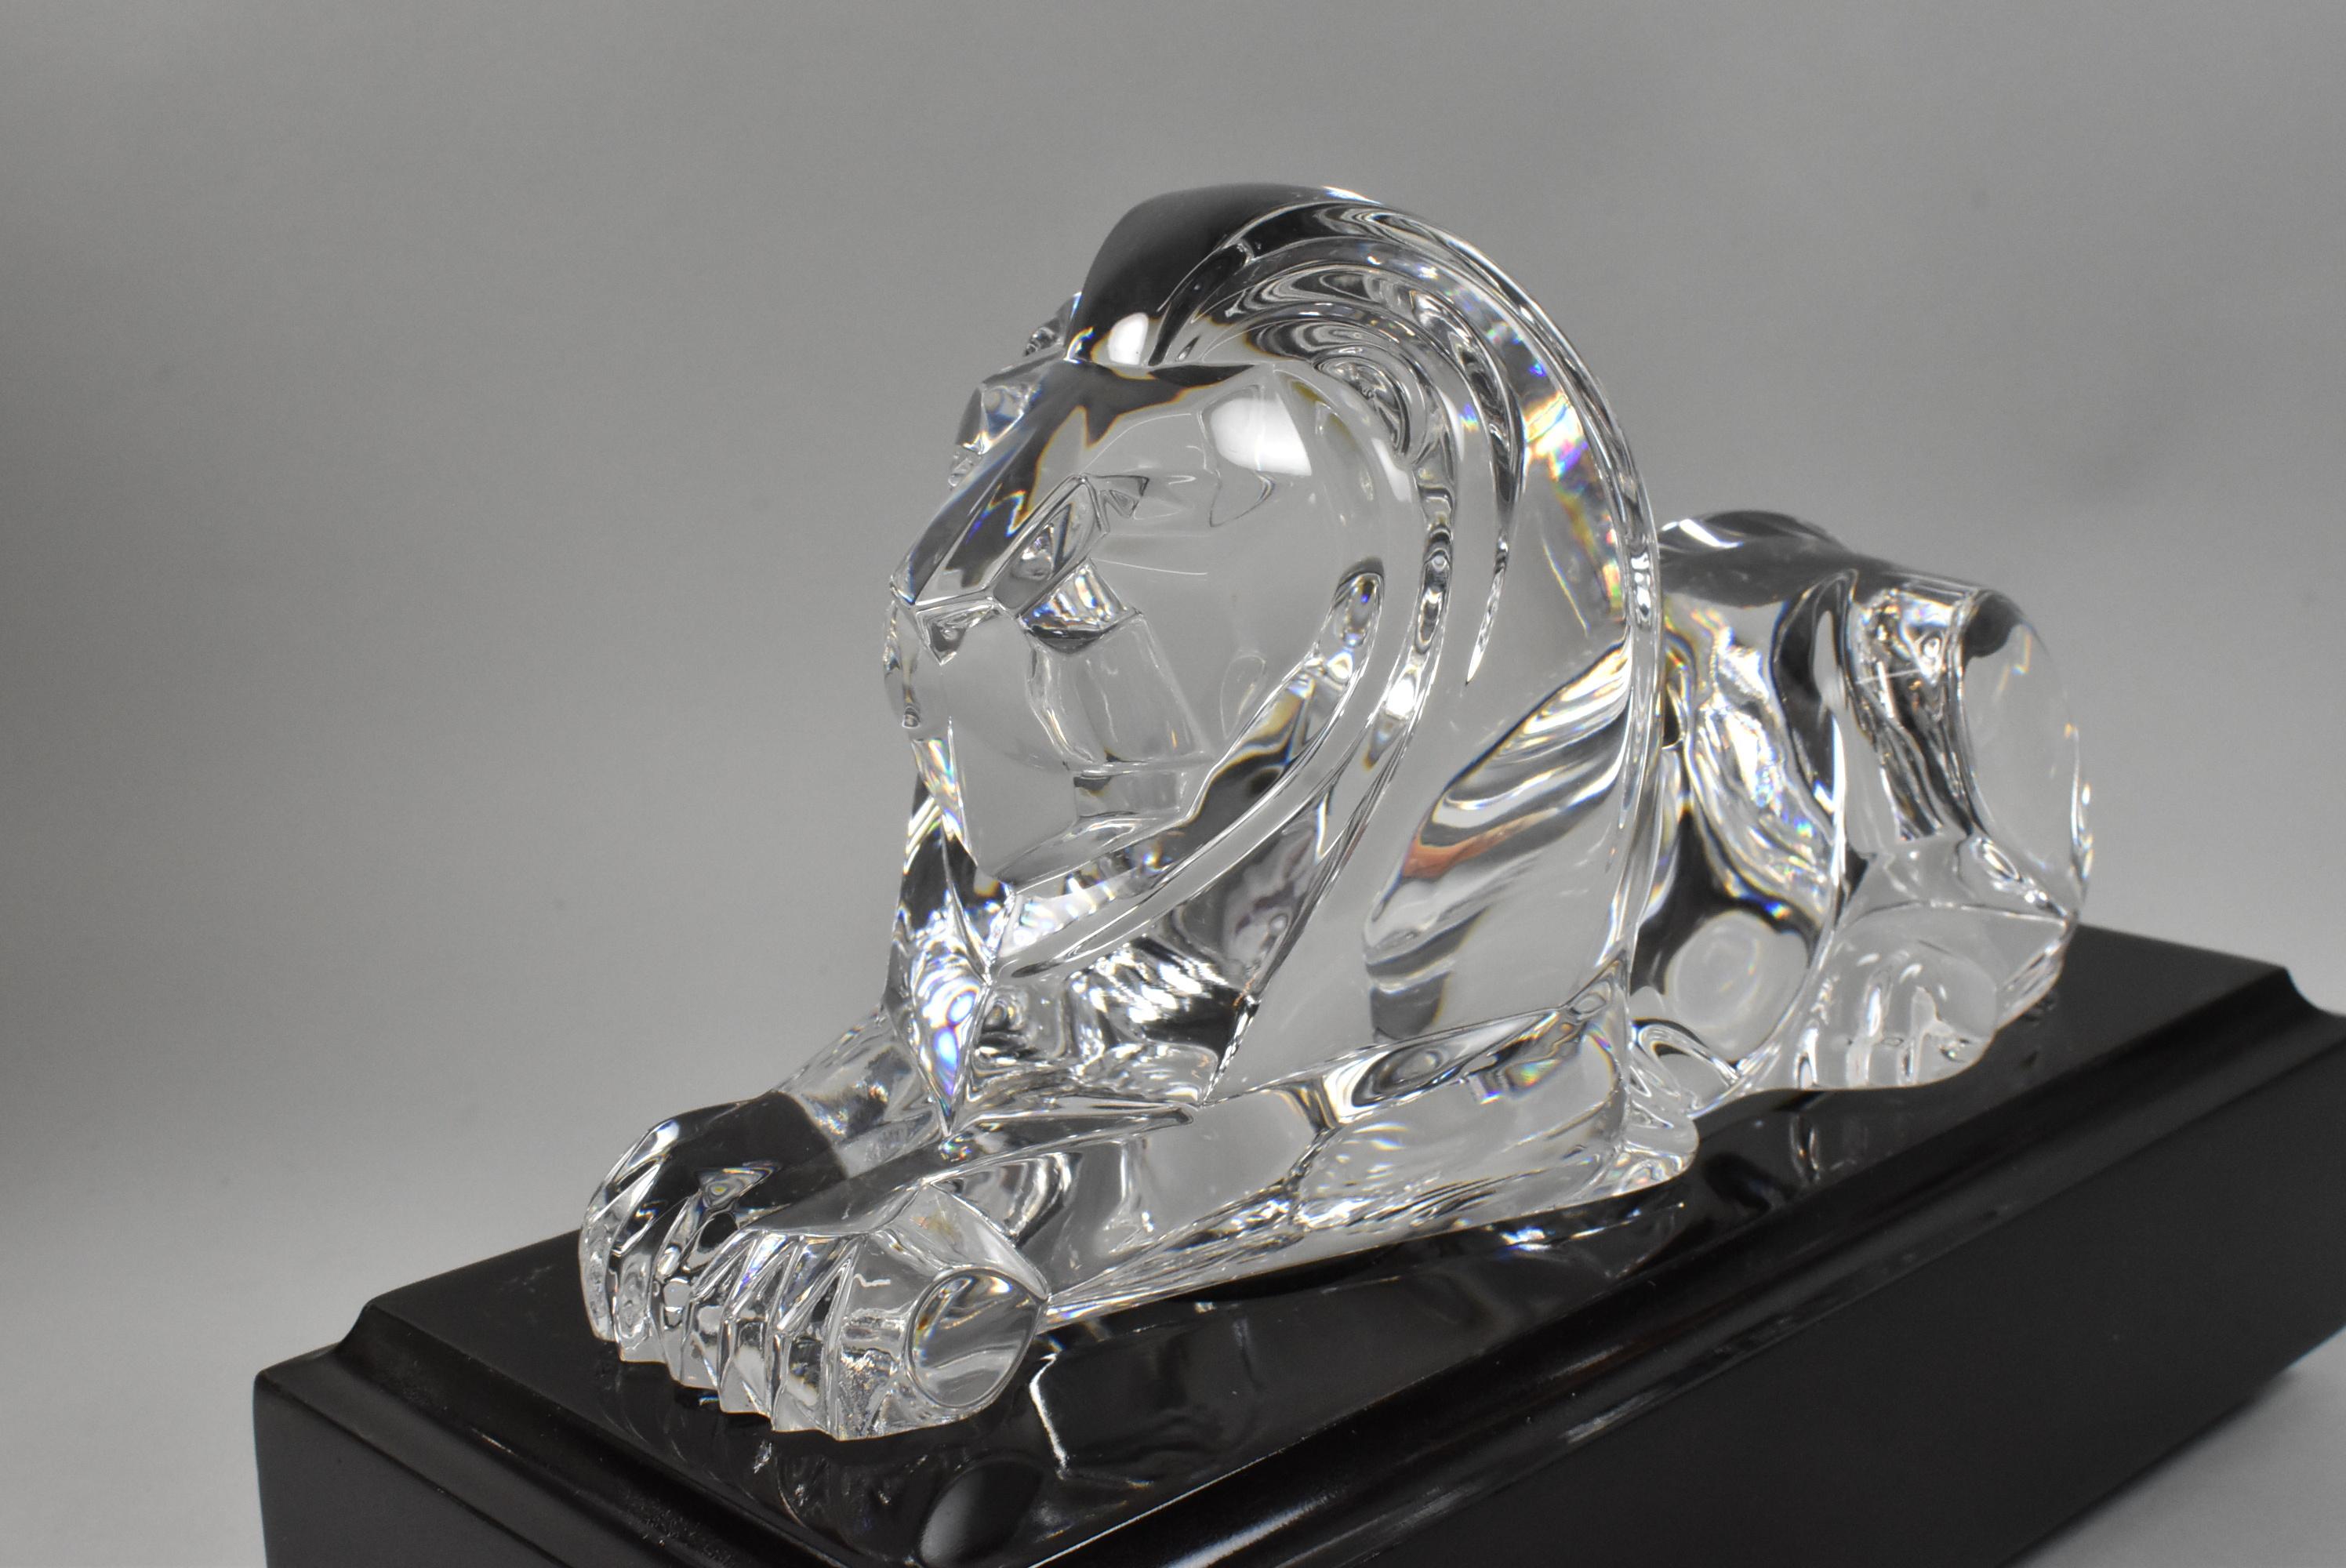 Steuben crystal laying lion with pedestal and original leather box. Designed by Lloyd Atkins circa 1986. No damage or scratches to crystal. Leather box has some wear.